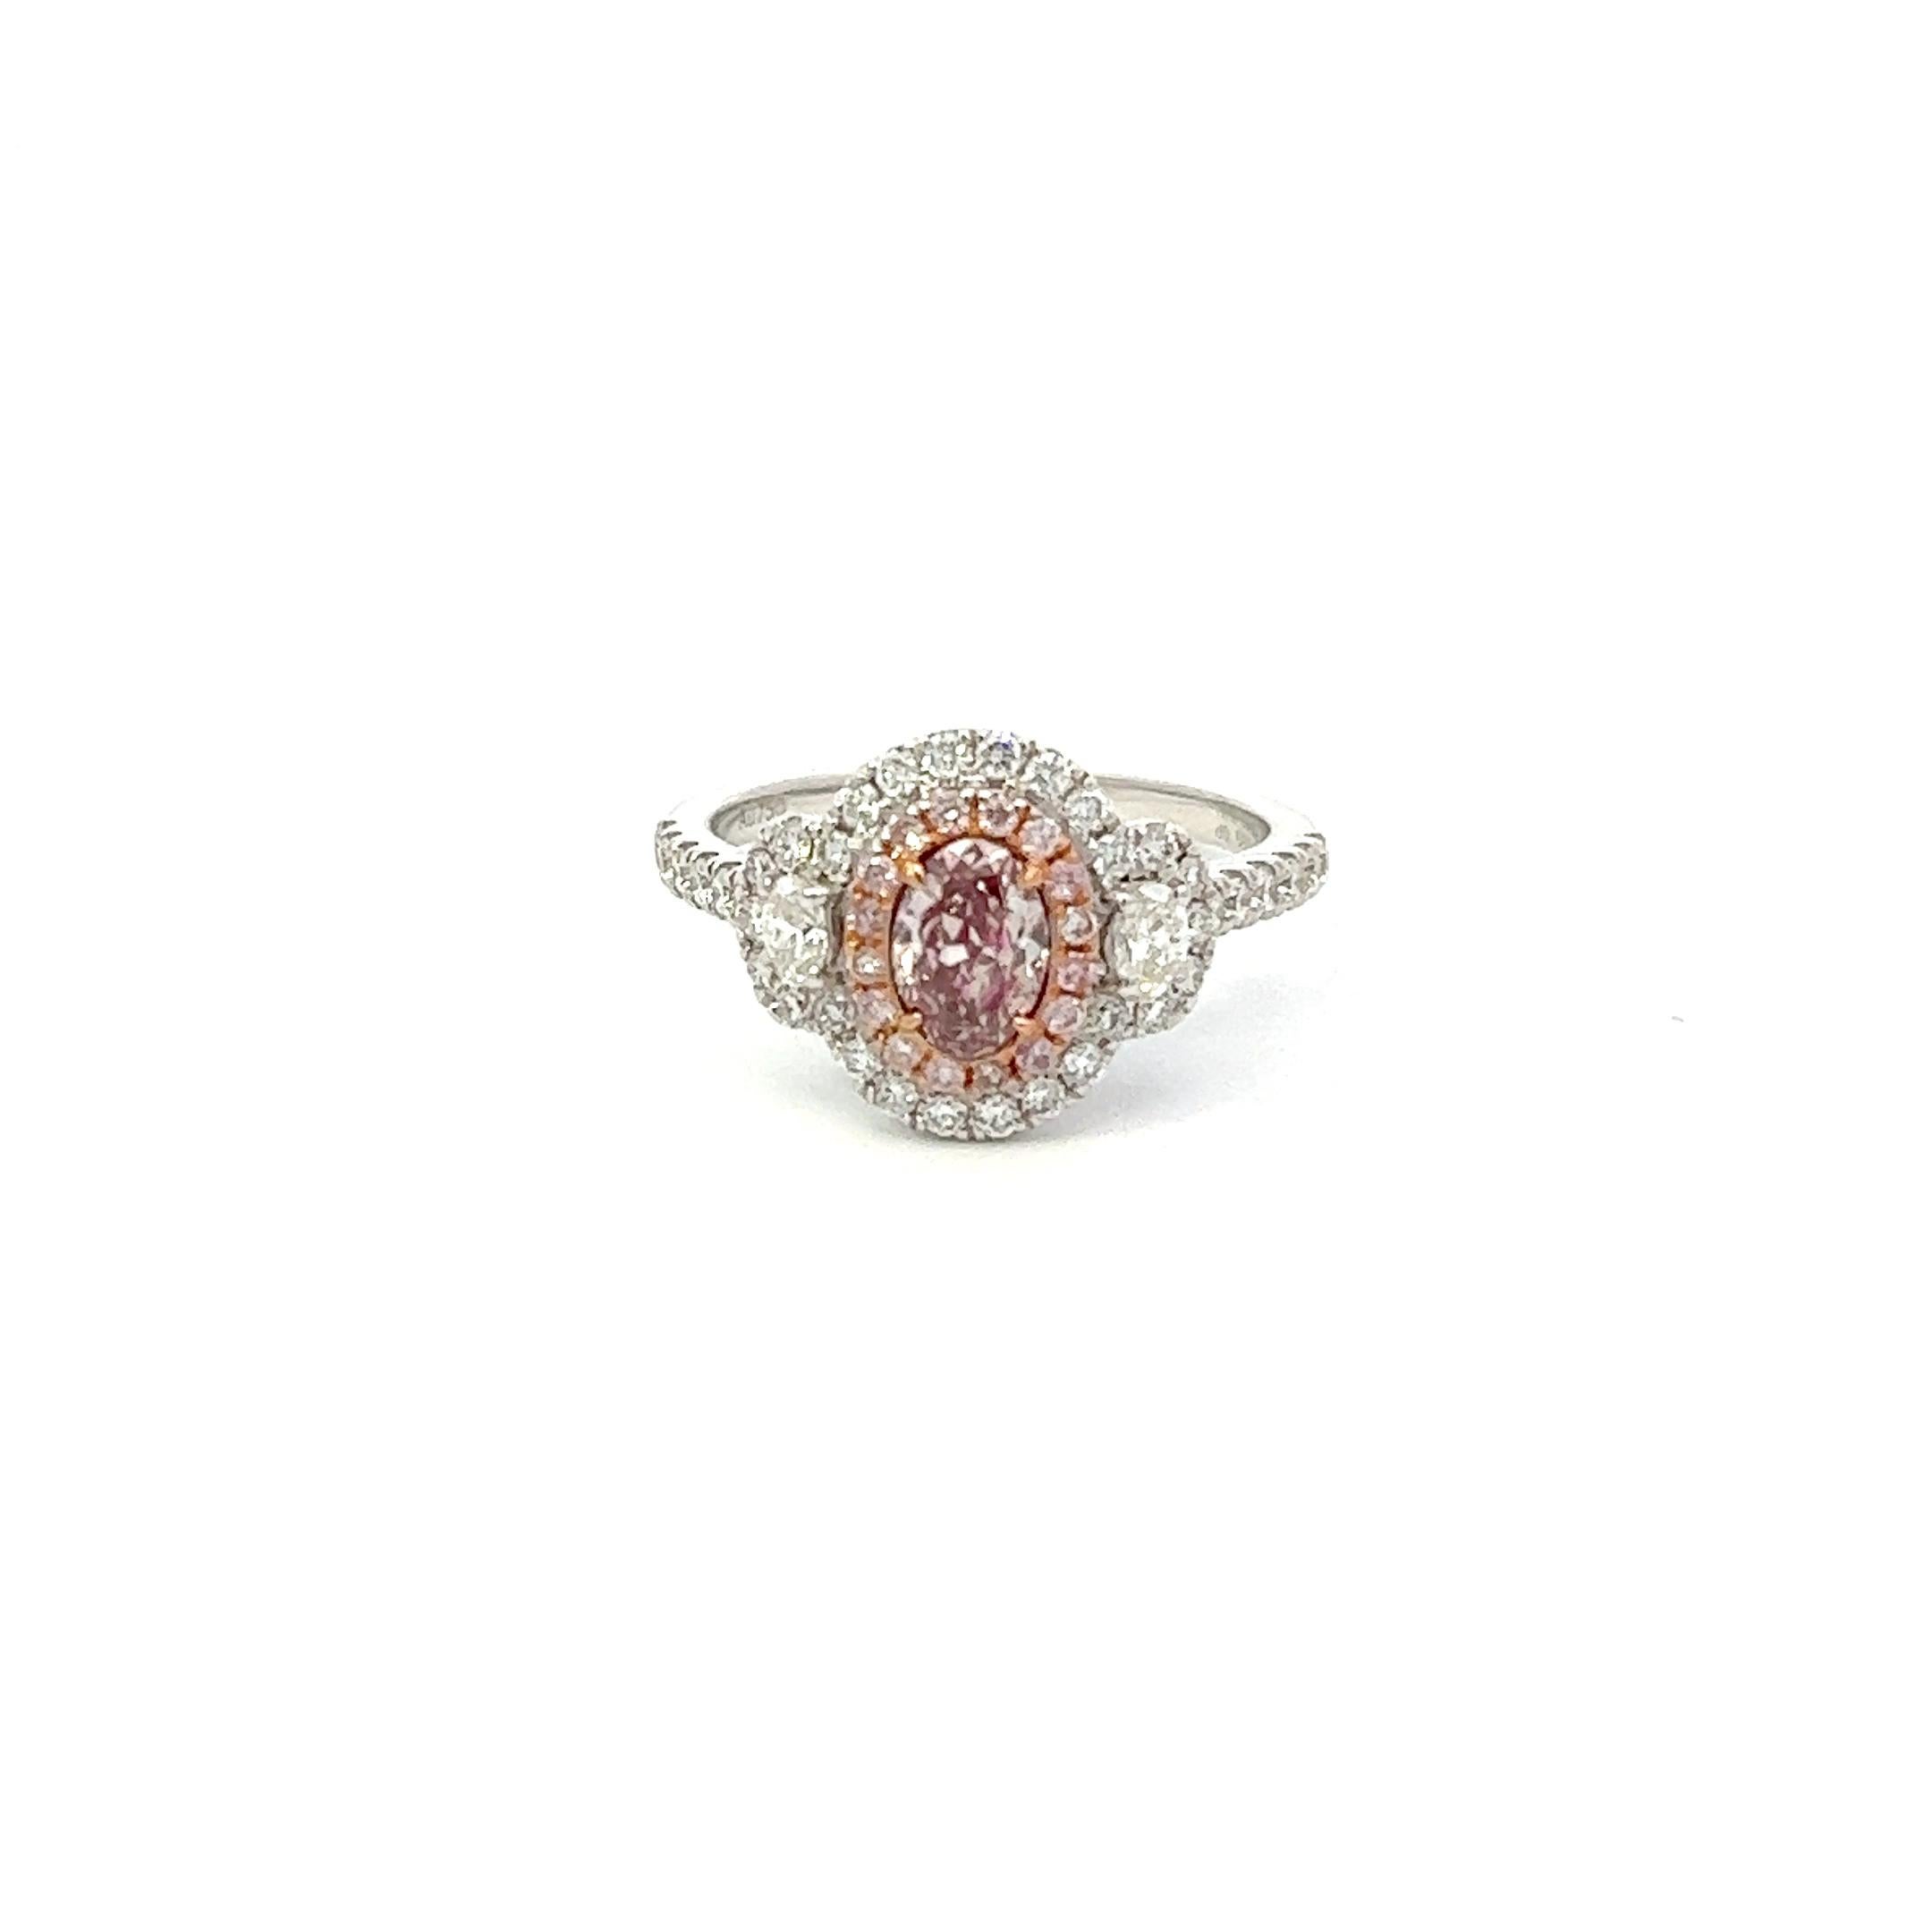 Center: 0.51ct Fancy Pinkish Brown Oval SI1 GIA# 2414397078
Setting: 18k White Gold 0.68ctw Pink and White Diamonds

An extremely rare and stunning natural pink diamond center. Pink Diamonds account for less than 0.01% of all diamonds mined in the